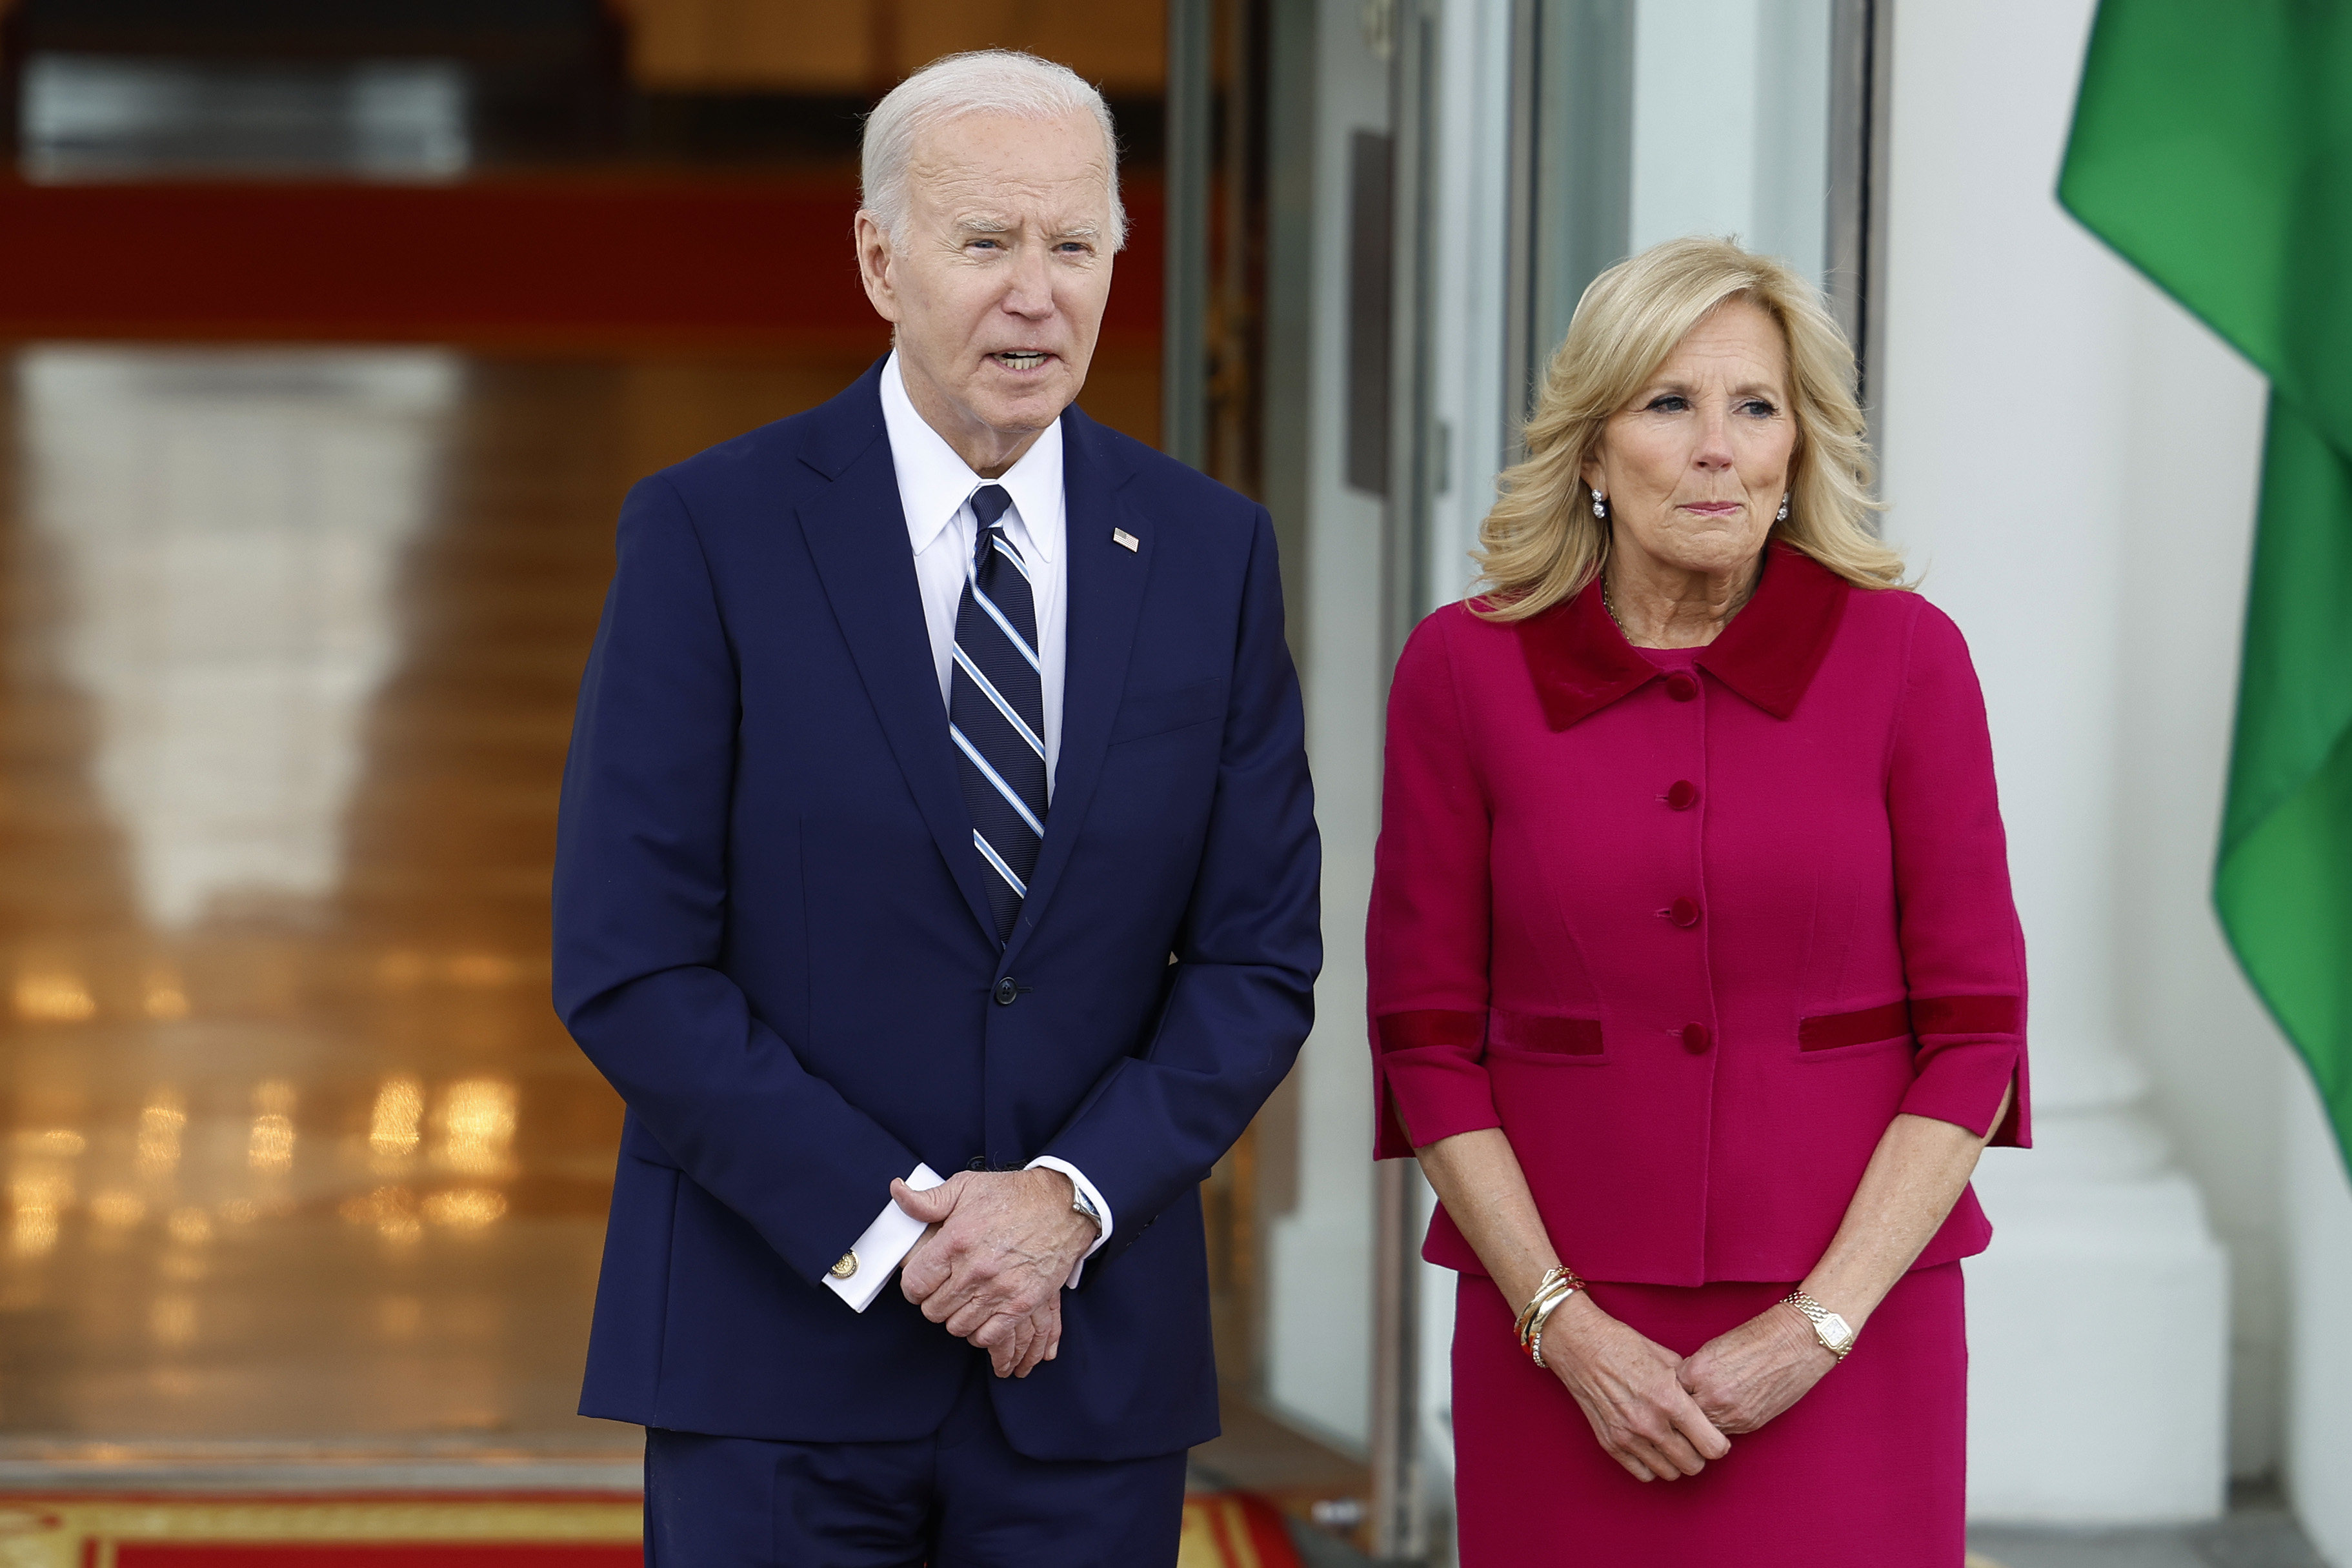 Joe Biden and Jill Biden standing together, Joe in a suit with a tie and Jill in a green dress and jacket